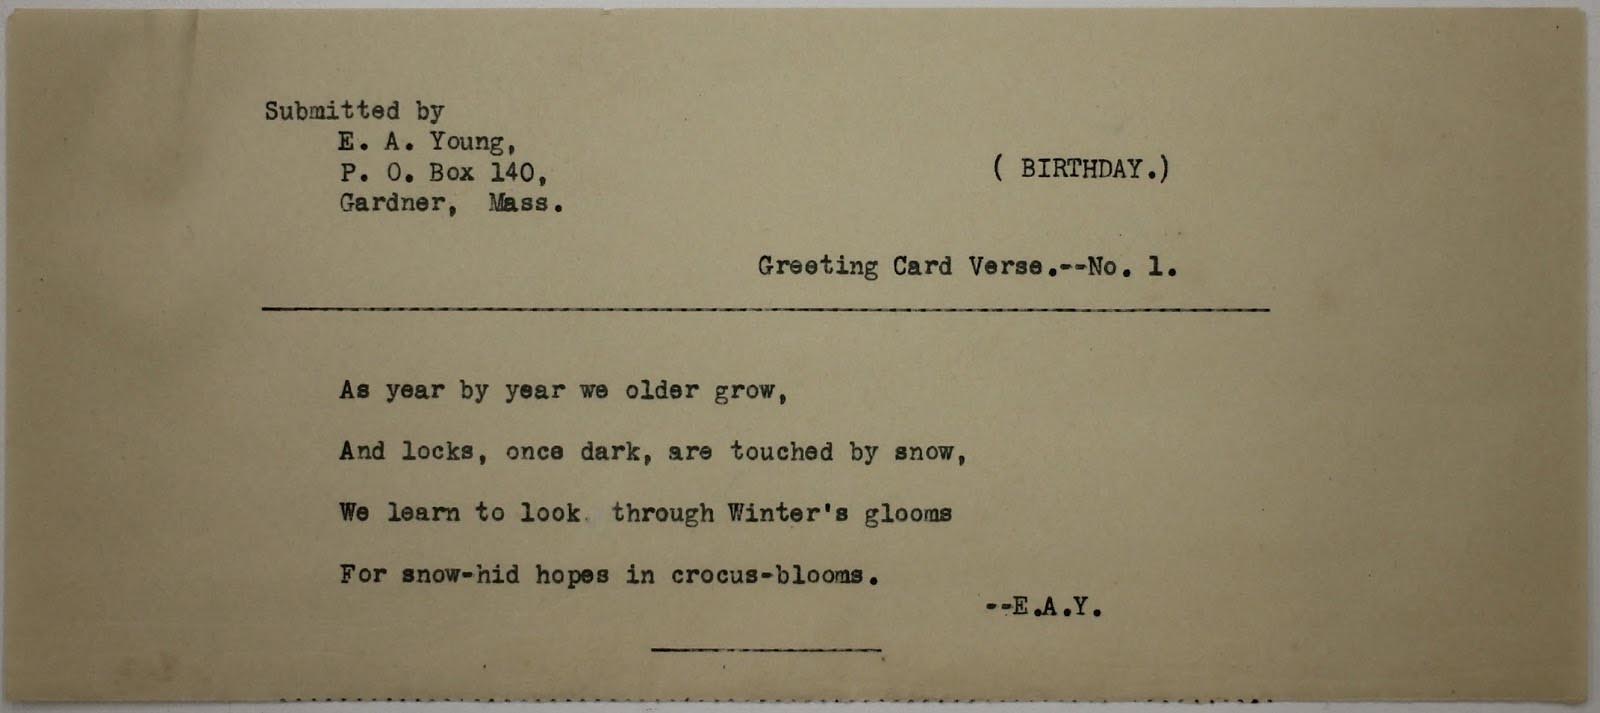 Typewritten page by EA Young: Birthday Greeting card verse: As year by year we older grow, And locks once dark, are touched by snow, We learn to look through Winter's glooms For snow-hid hopes in crocus-blooms.